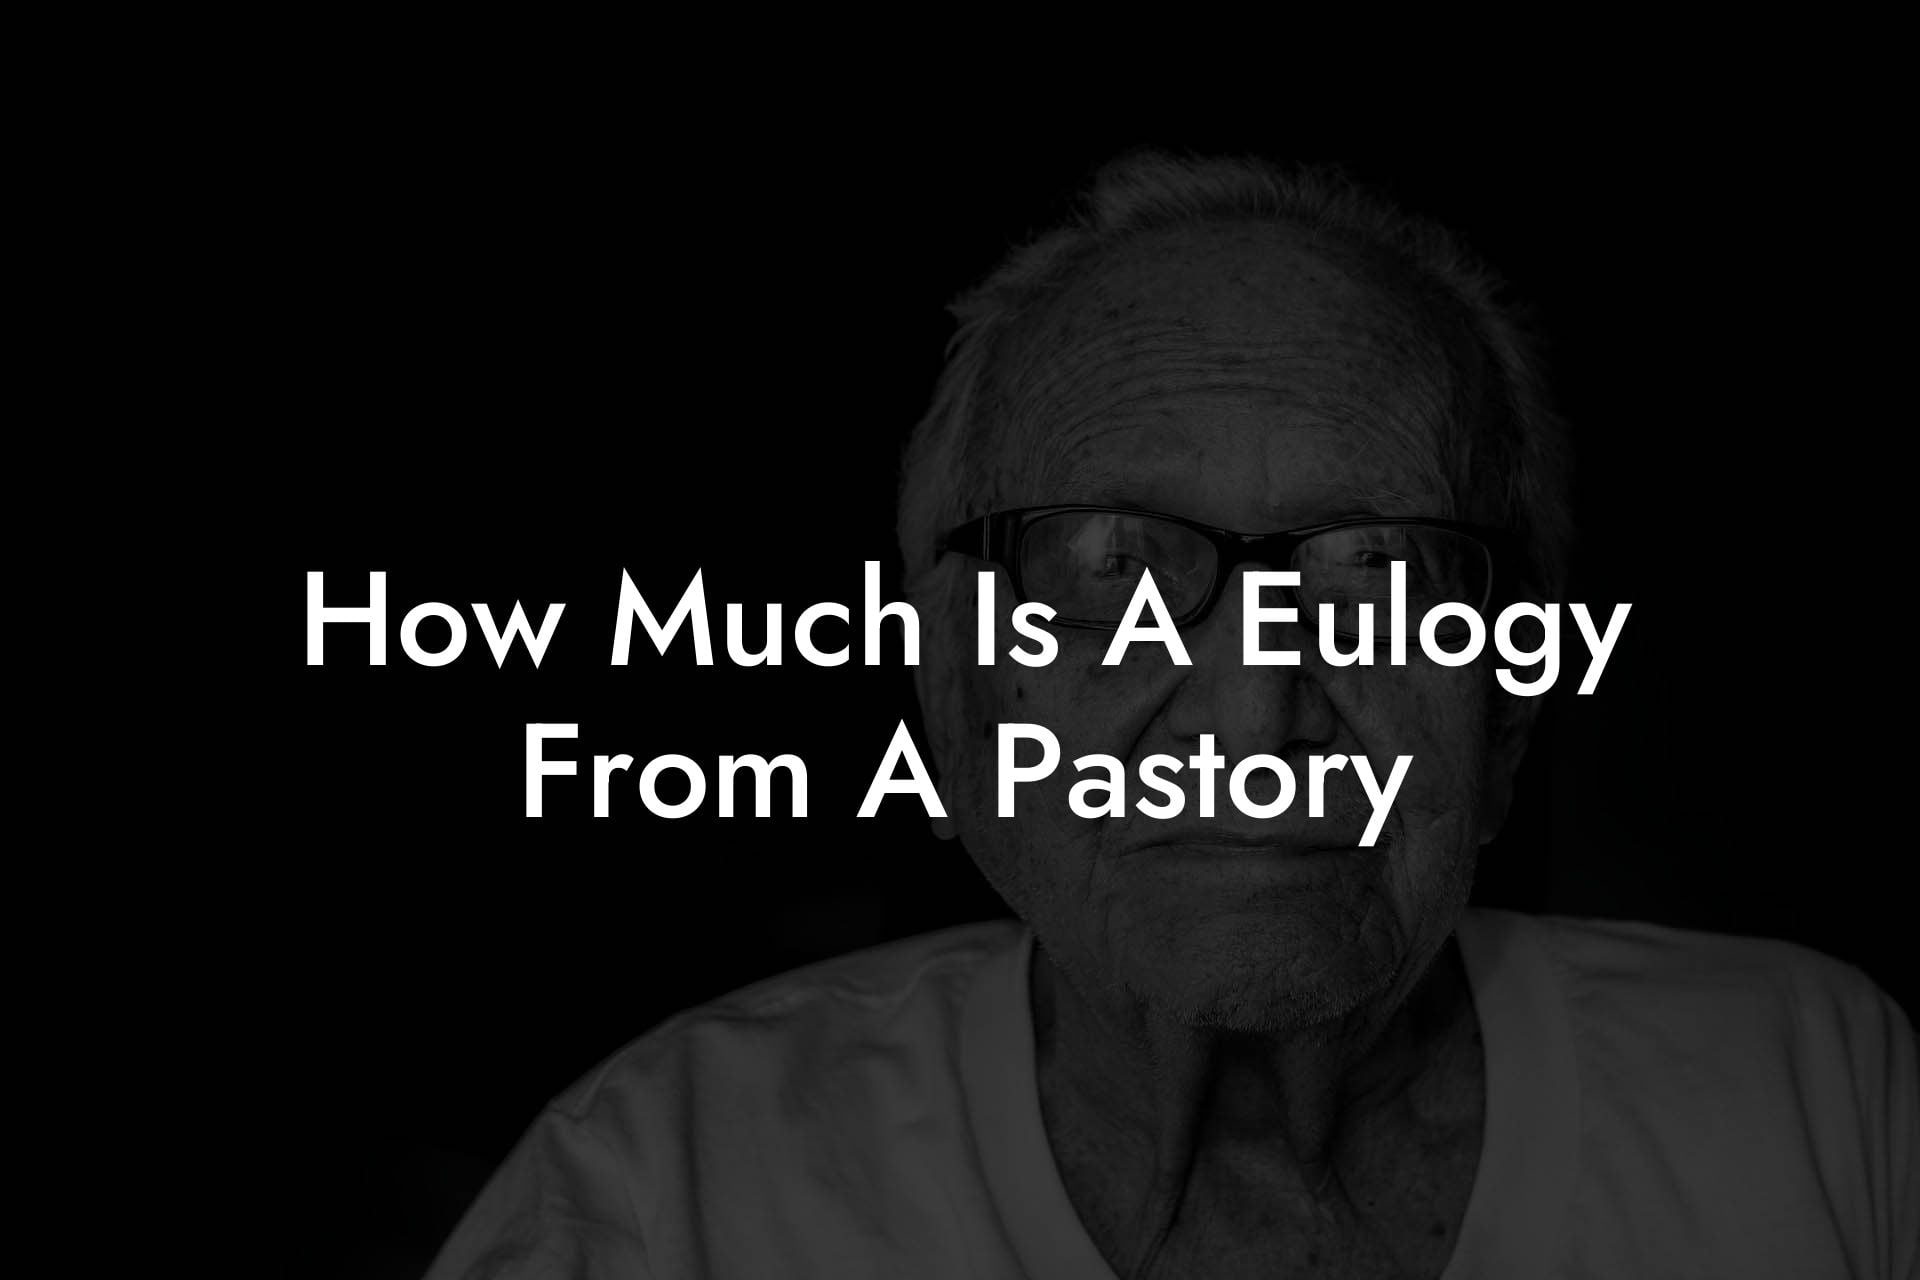 How Much Is A Eulogy From A Pastory